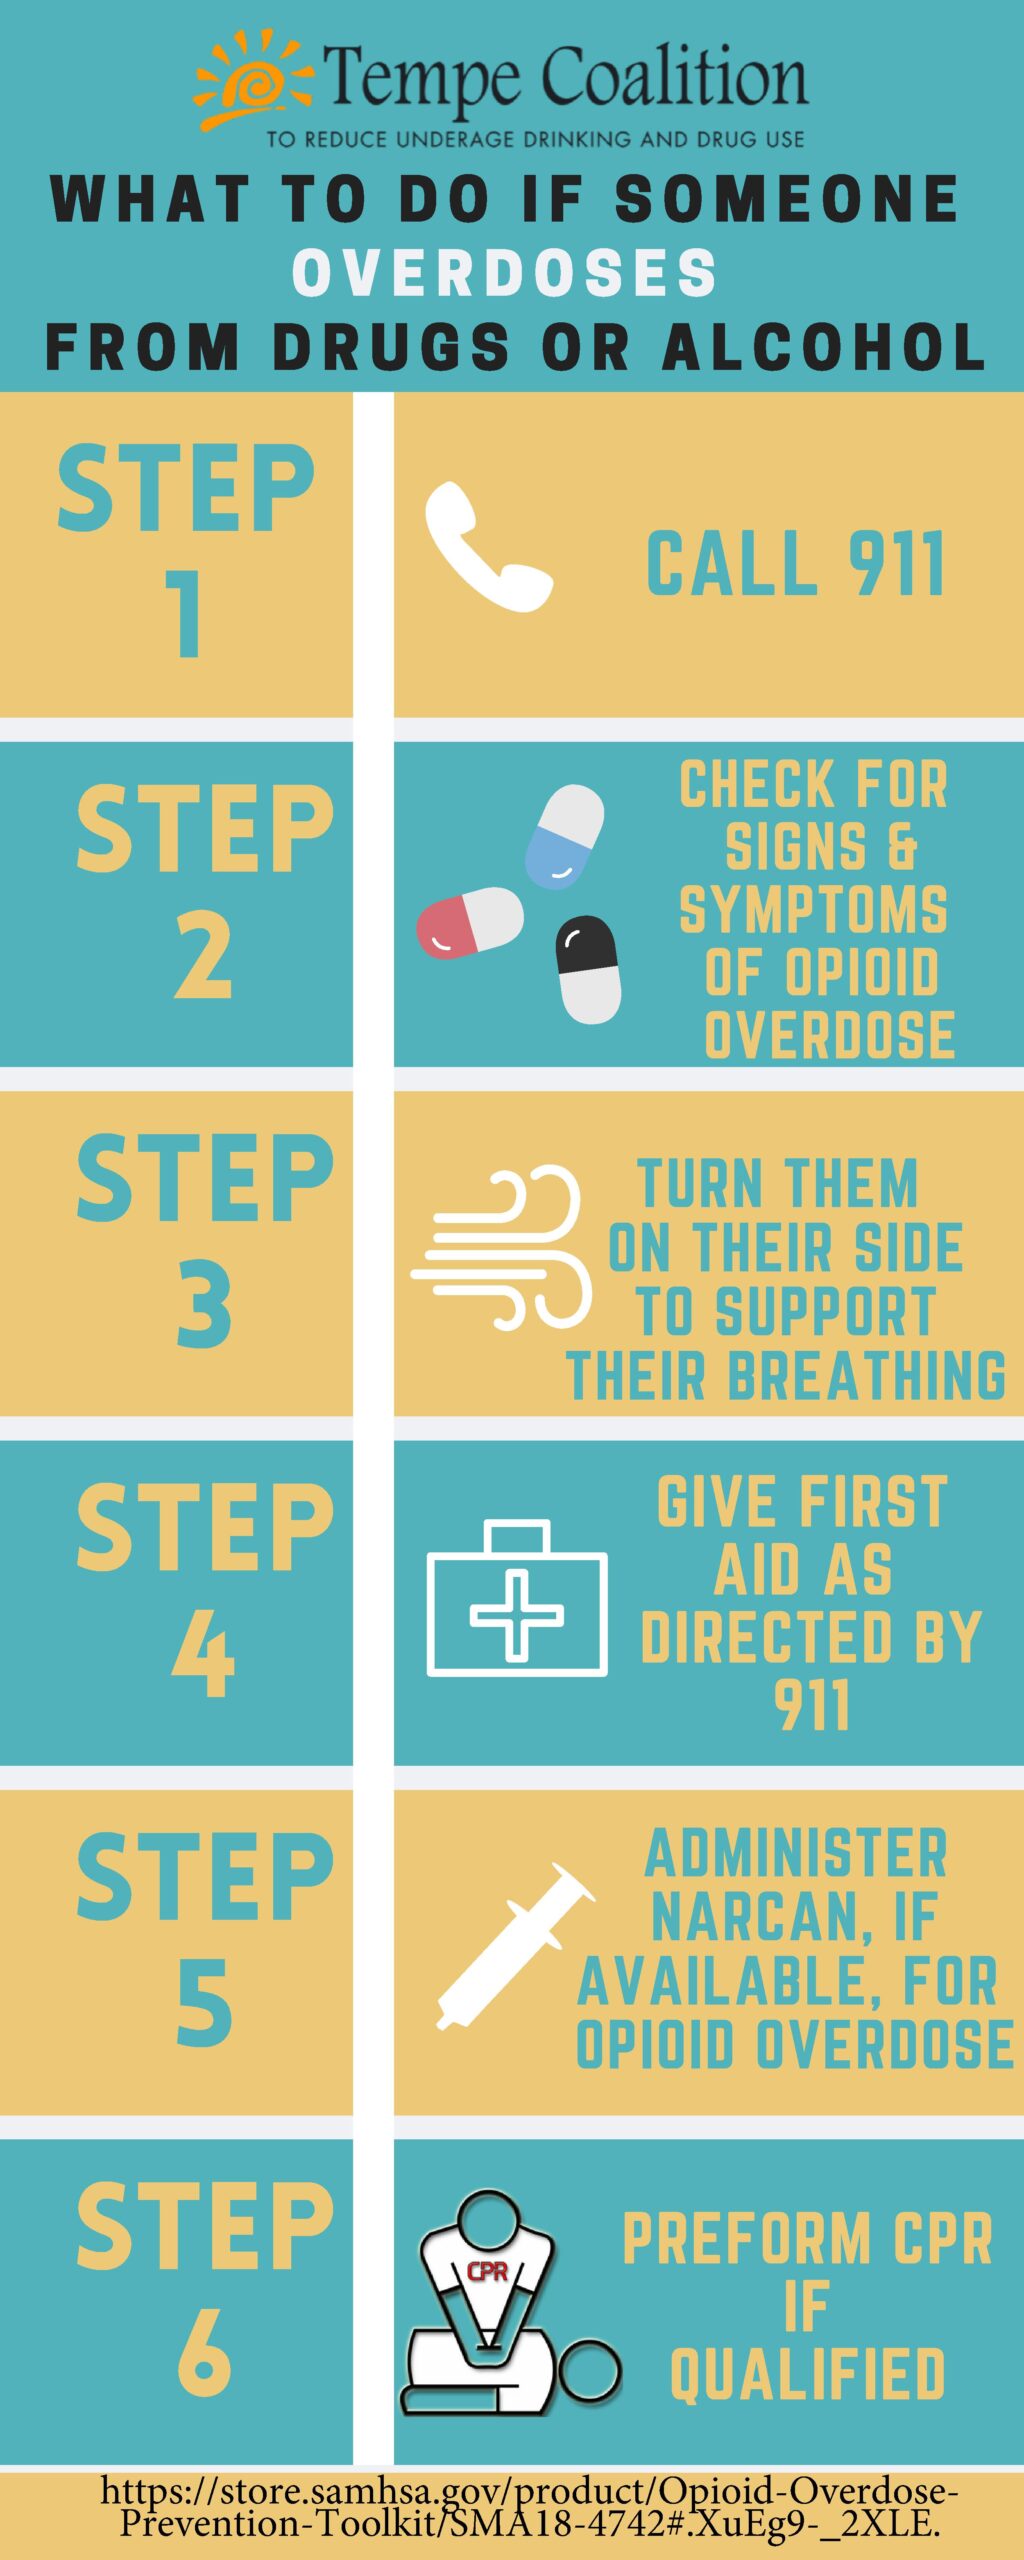 WHAT TO DO IF SOMEONE OVERDOSES (rev)